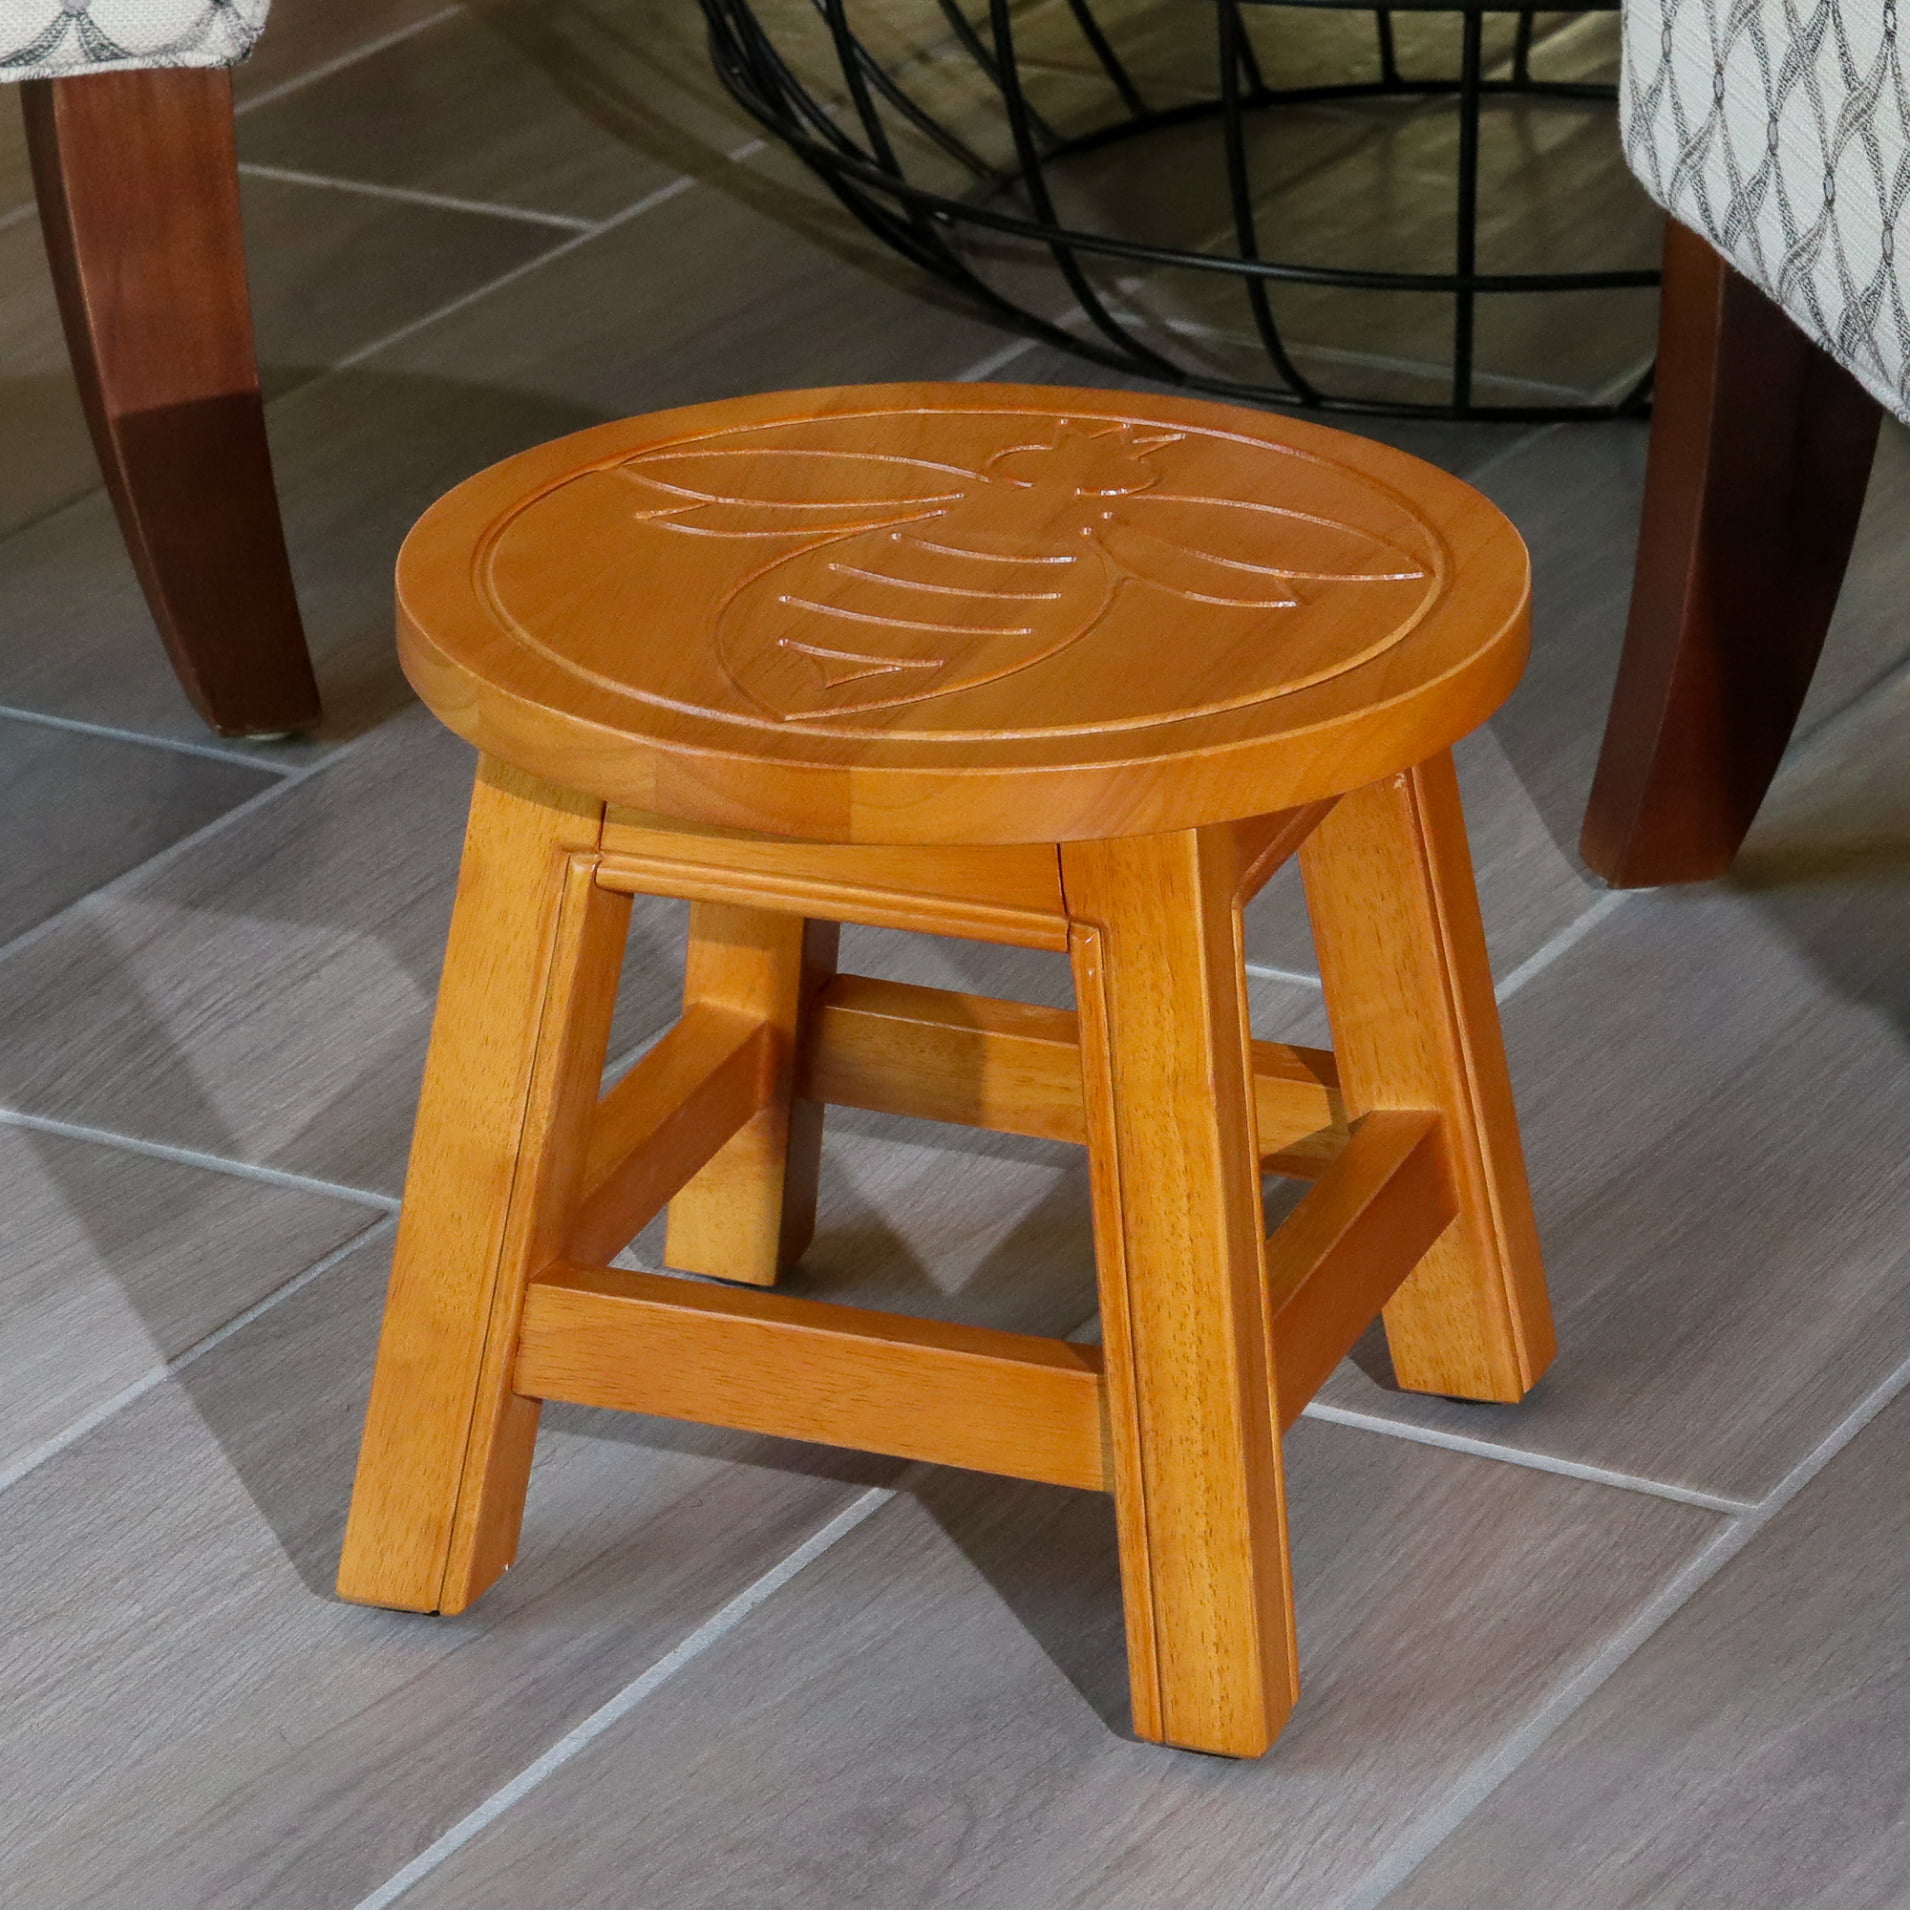 Wooden Step Stool, Round Mini Side Table, Carved with Maple Leaf Pattern,  Indoor Foot Stool for Kitchen Living Room Bedroom Bathroom, No Assembly